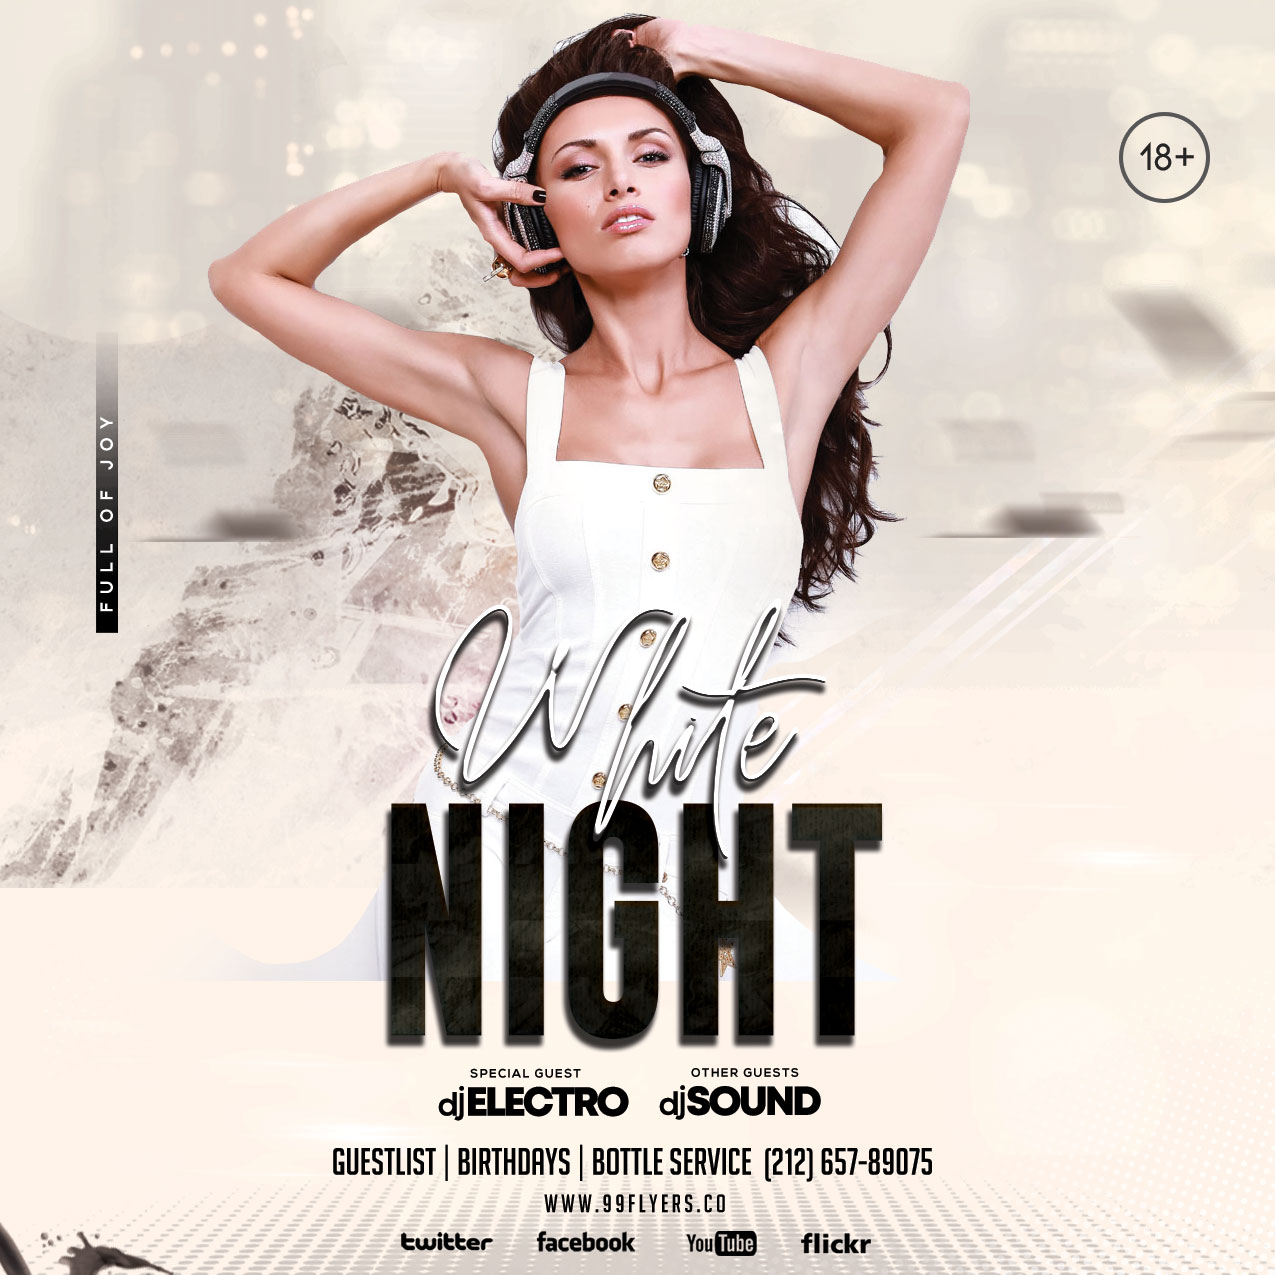 Party Music Free Instagram Psd Flyer Template By 99flyers On Deviantart